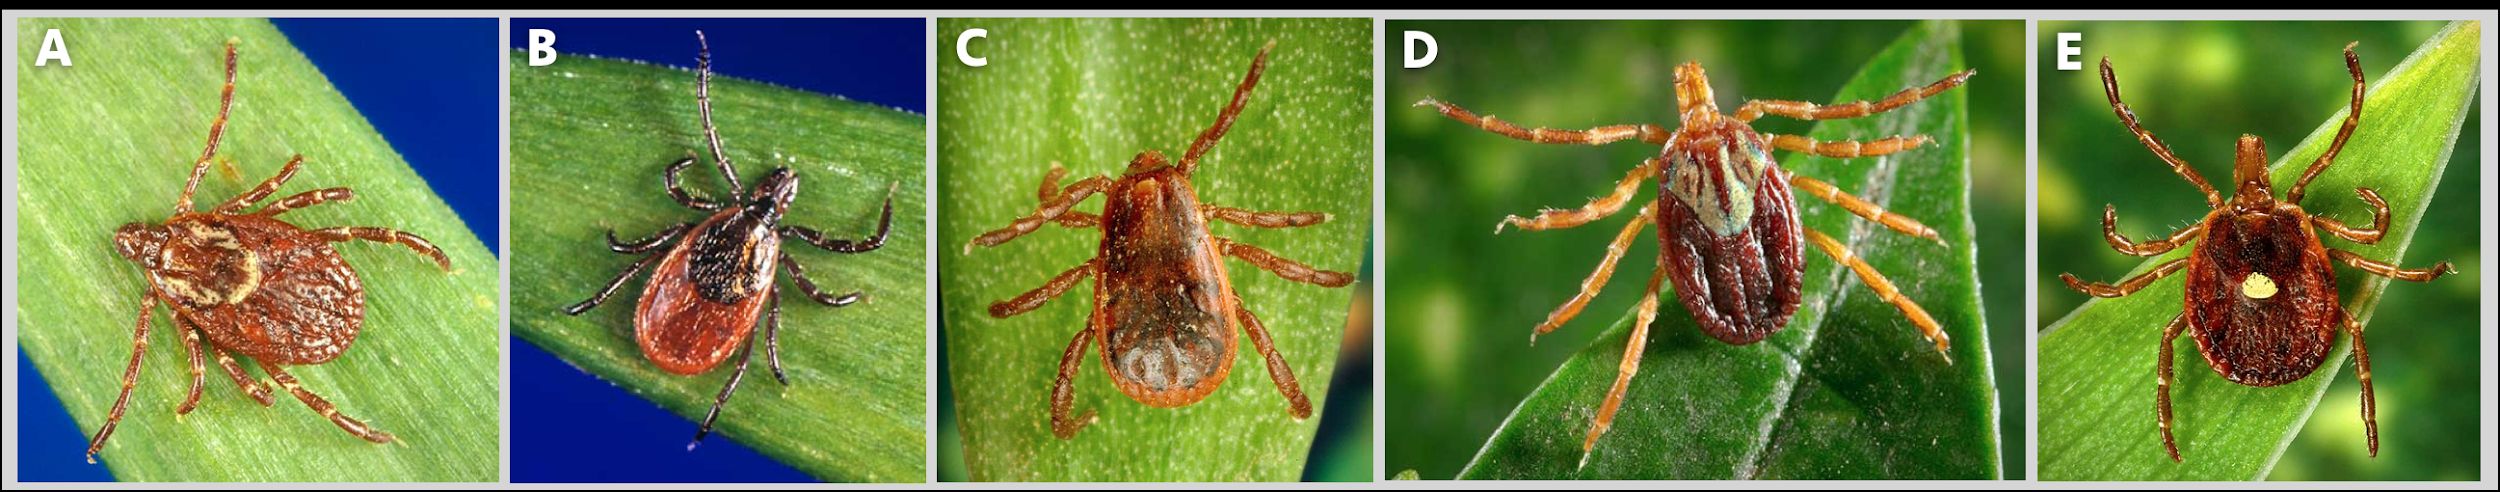 The five most common disease-transmitting species of tick in the southeastern United States are American dog tick (Dermacentor variabilis; A, blacklegged tick (Ixodes scapularis; B, brown dog tick (Rhipicephalus sanguineus; C, Gulf Coast tick (Amblyomma maculatum; D, and lone star tick (Amblyomma americanum; E). All photos are of adult female ticks; Sizes are not relative. 